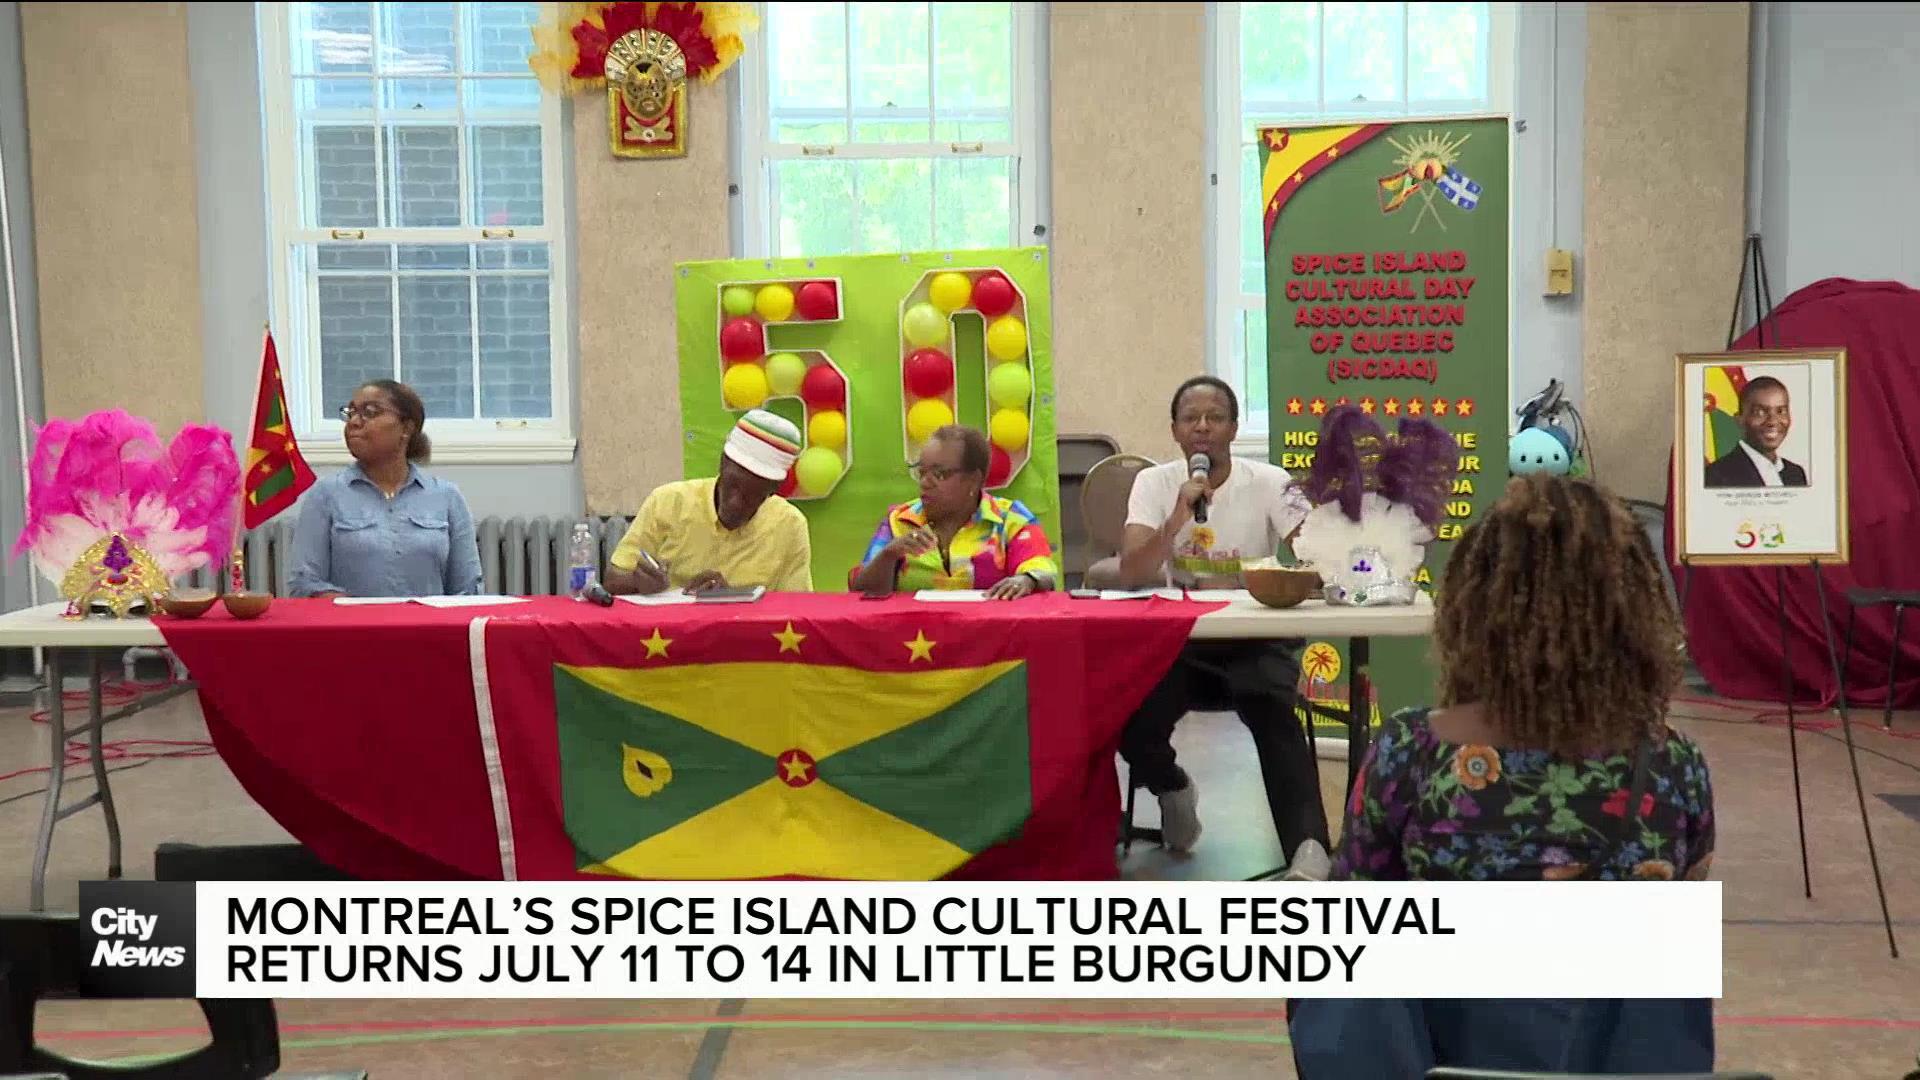 Montreal’s Spice Island Cultural Festival returns in July